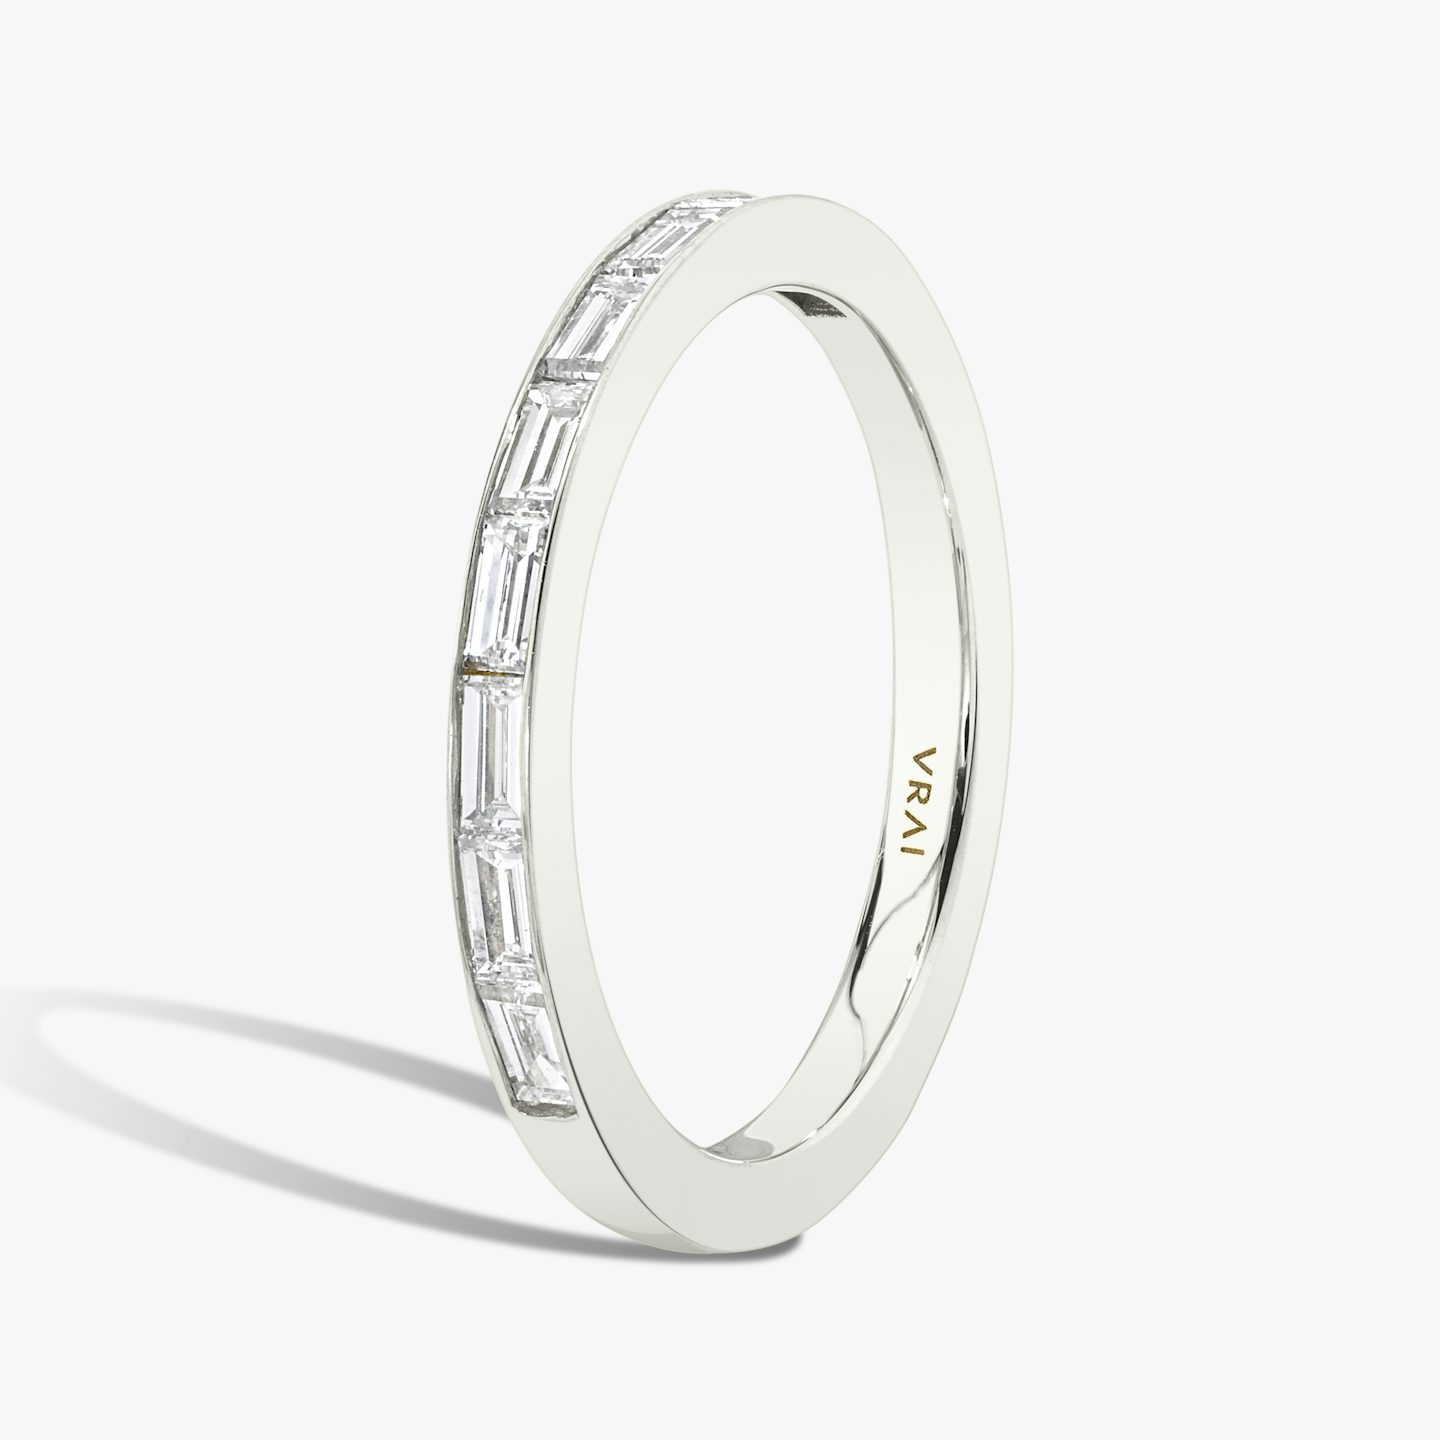 The Devotion Band | Baguette | Platinum | Band style: Half diamond | Band width: Large